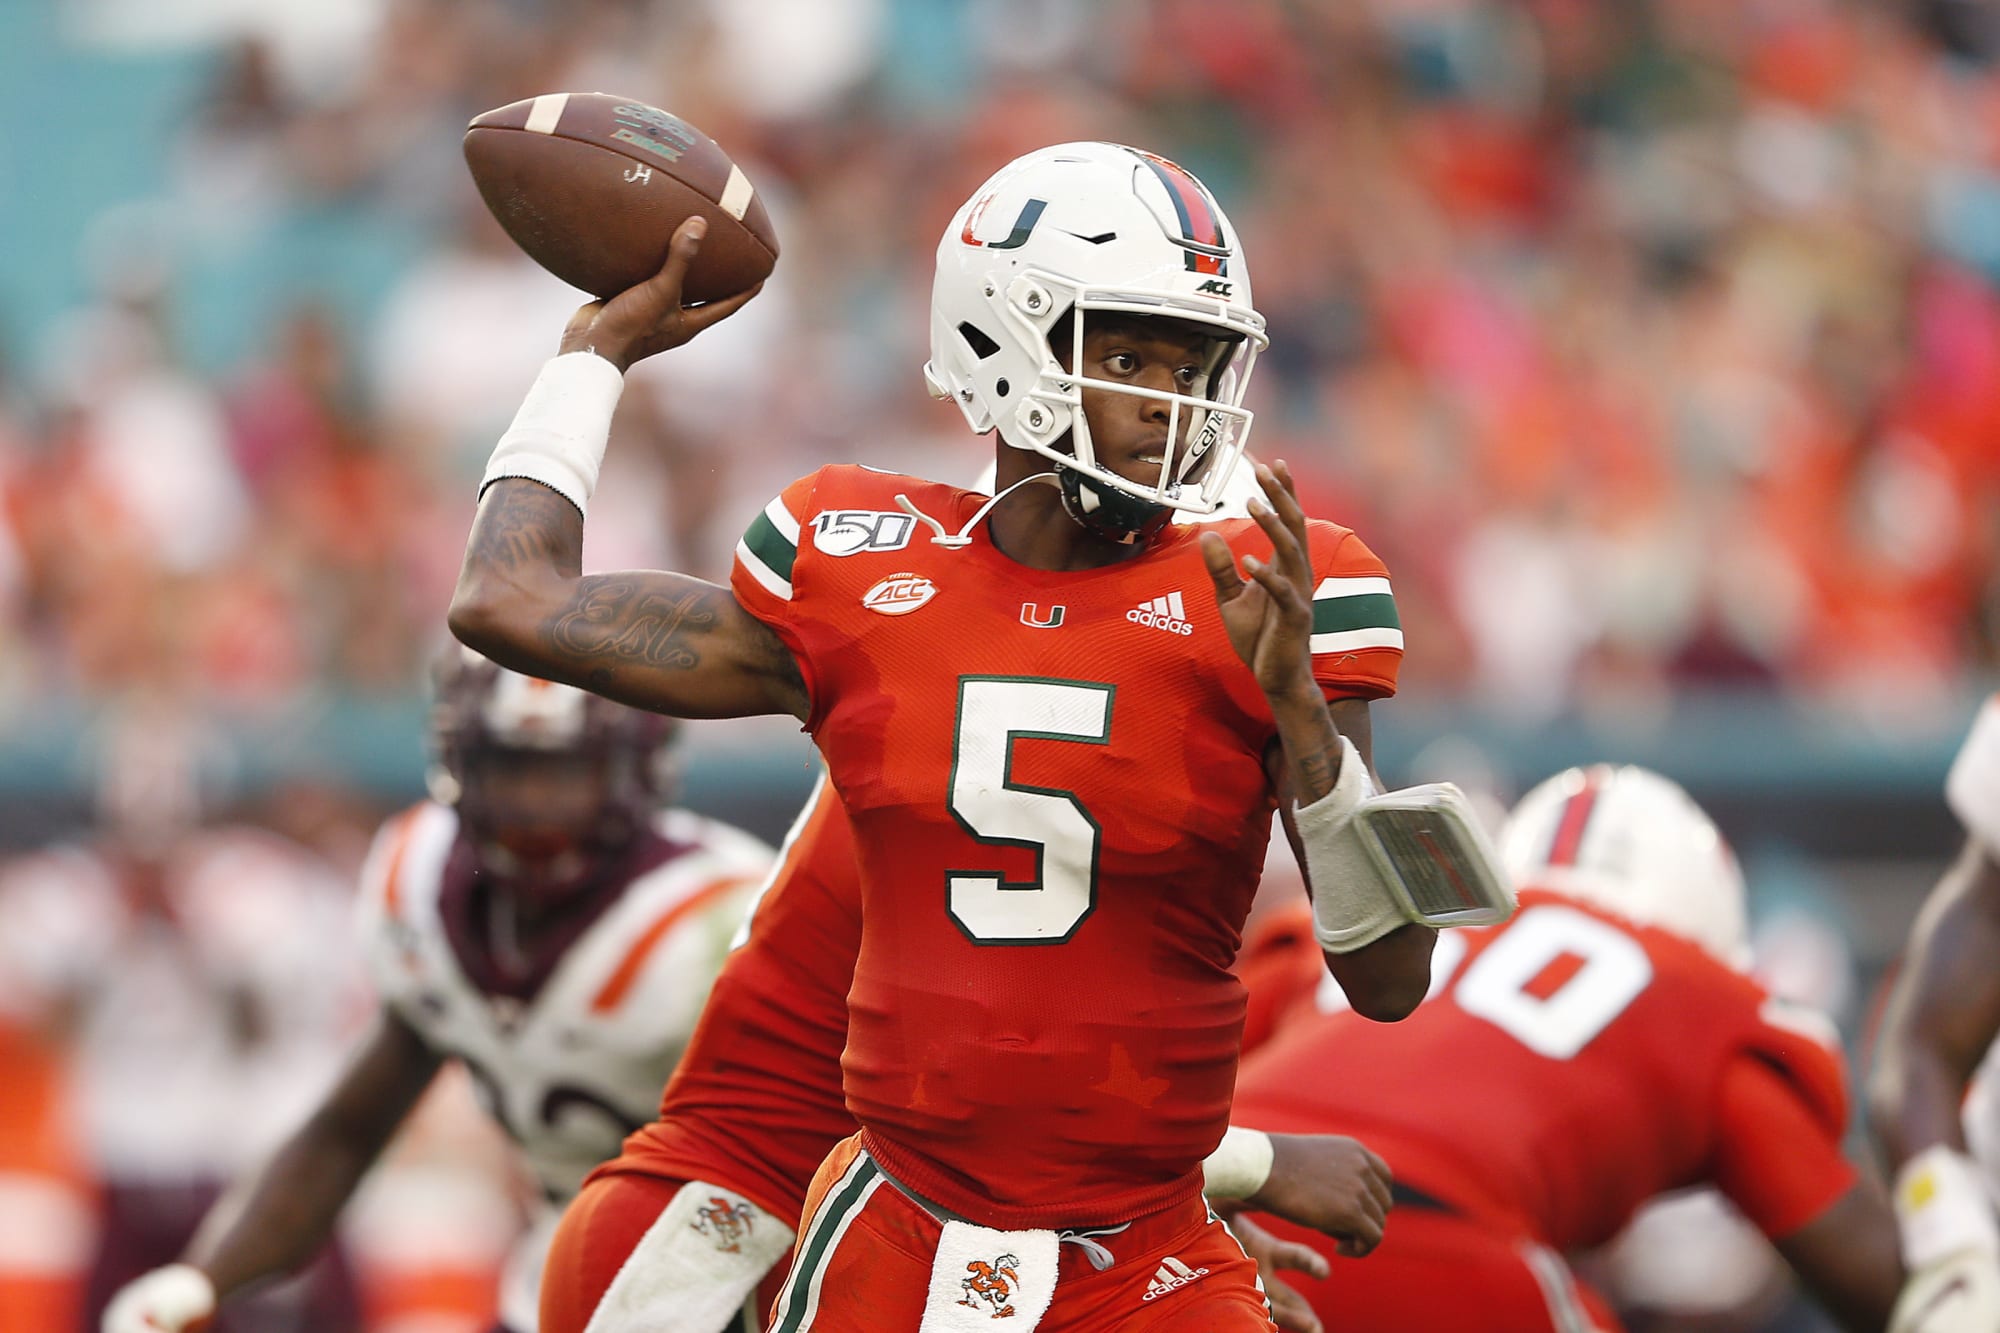 Miami football Turnovers gave Virginia Tech 21 points and took 14 from